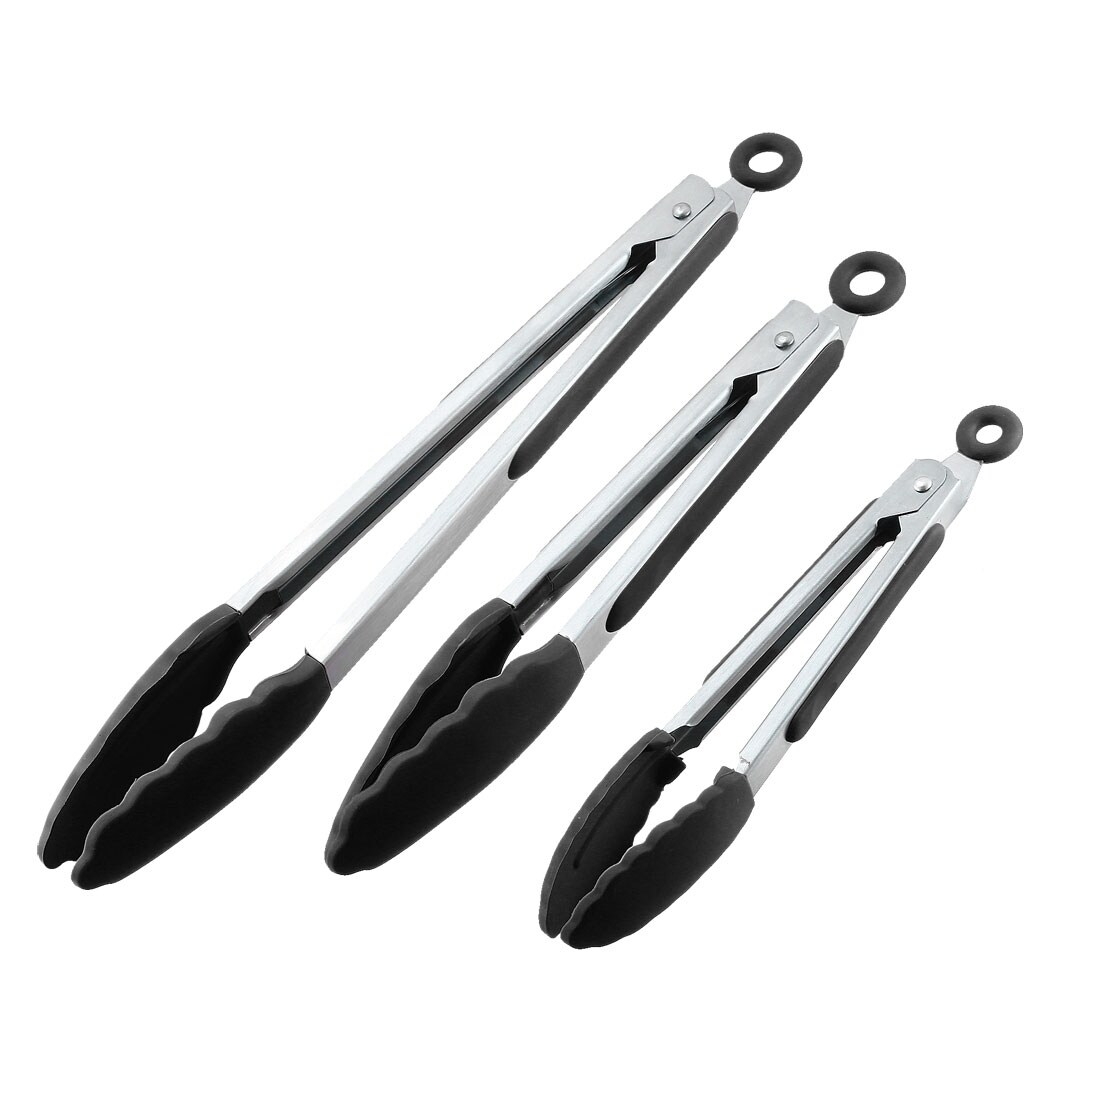 KitchenAid Tongs Lockable Stainless-Steel Black Silicone Tipped